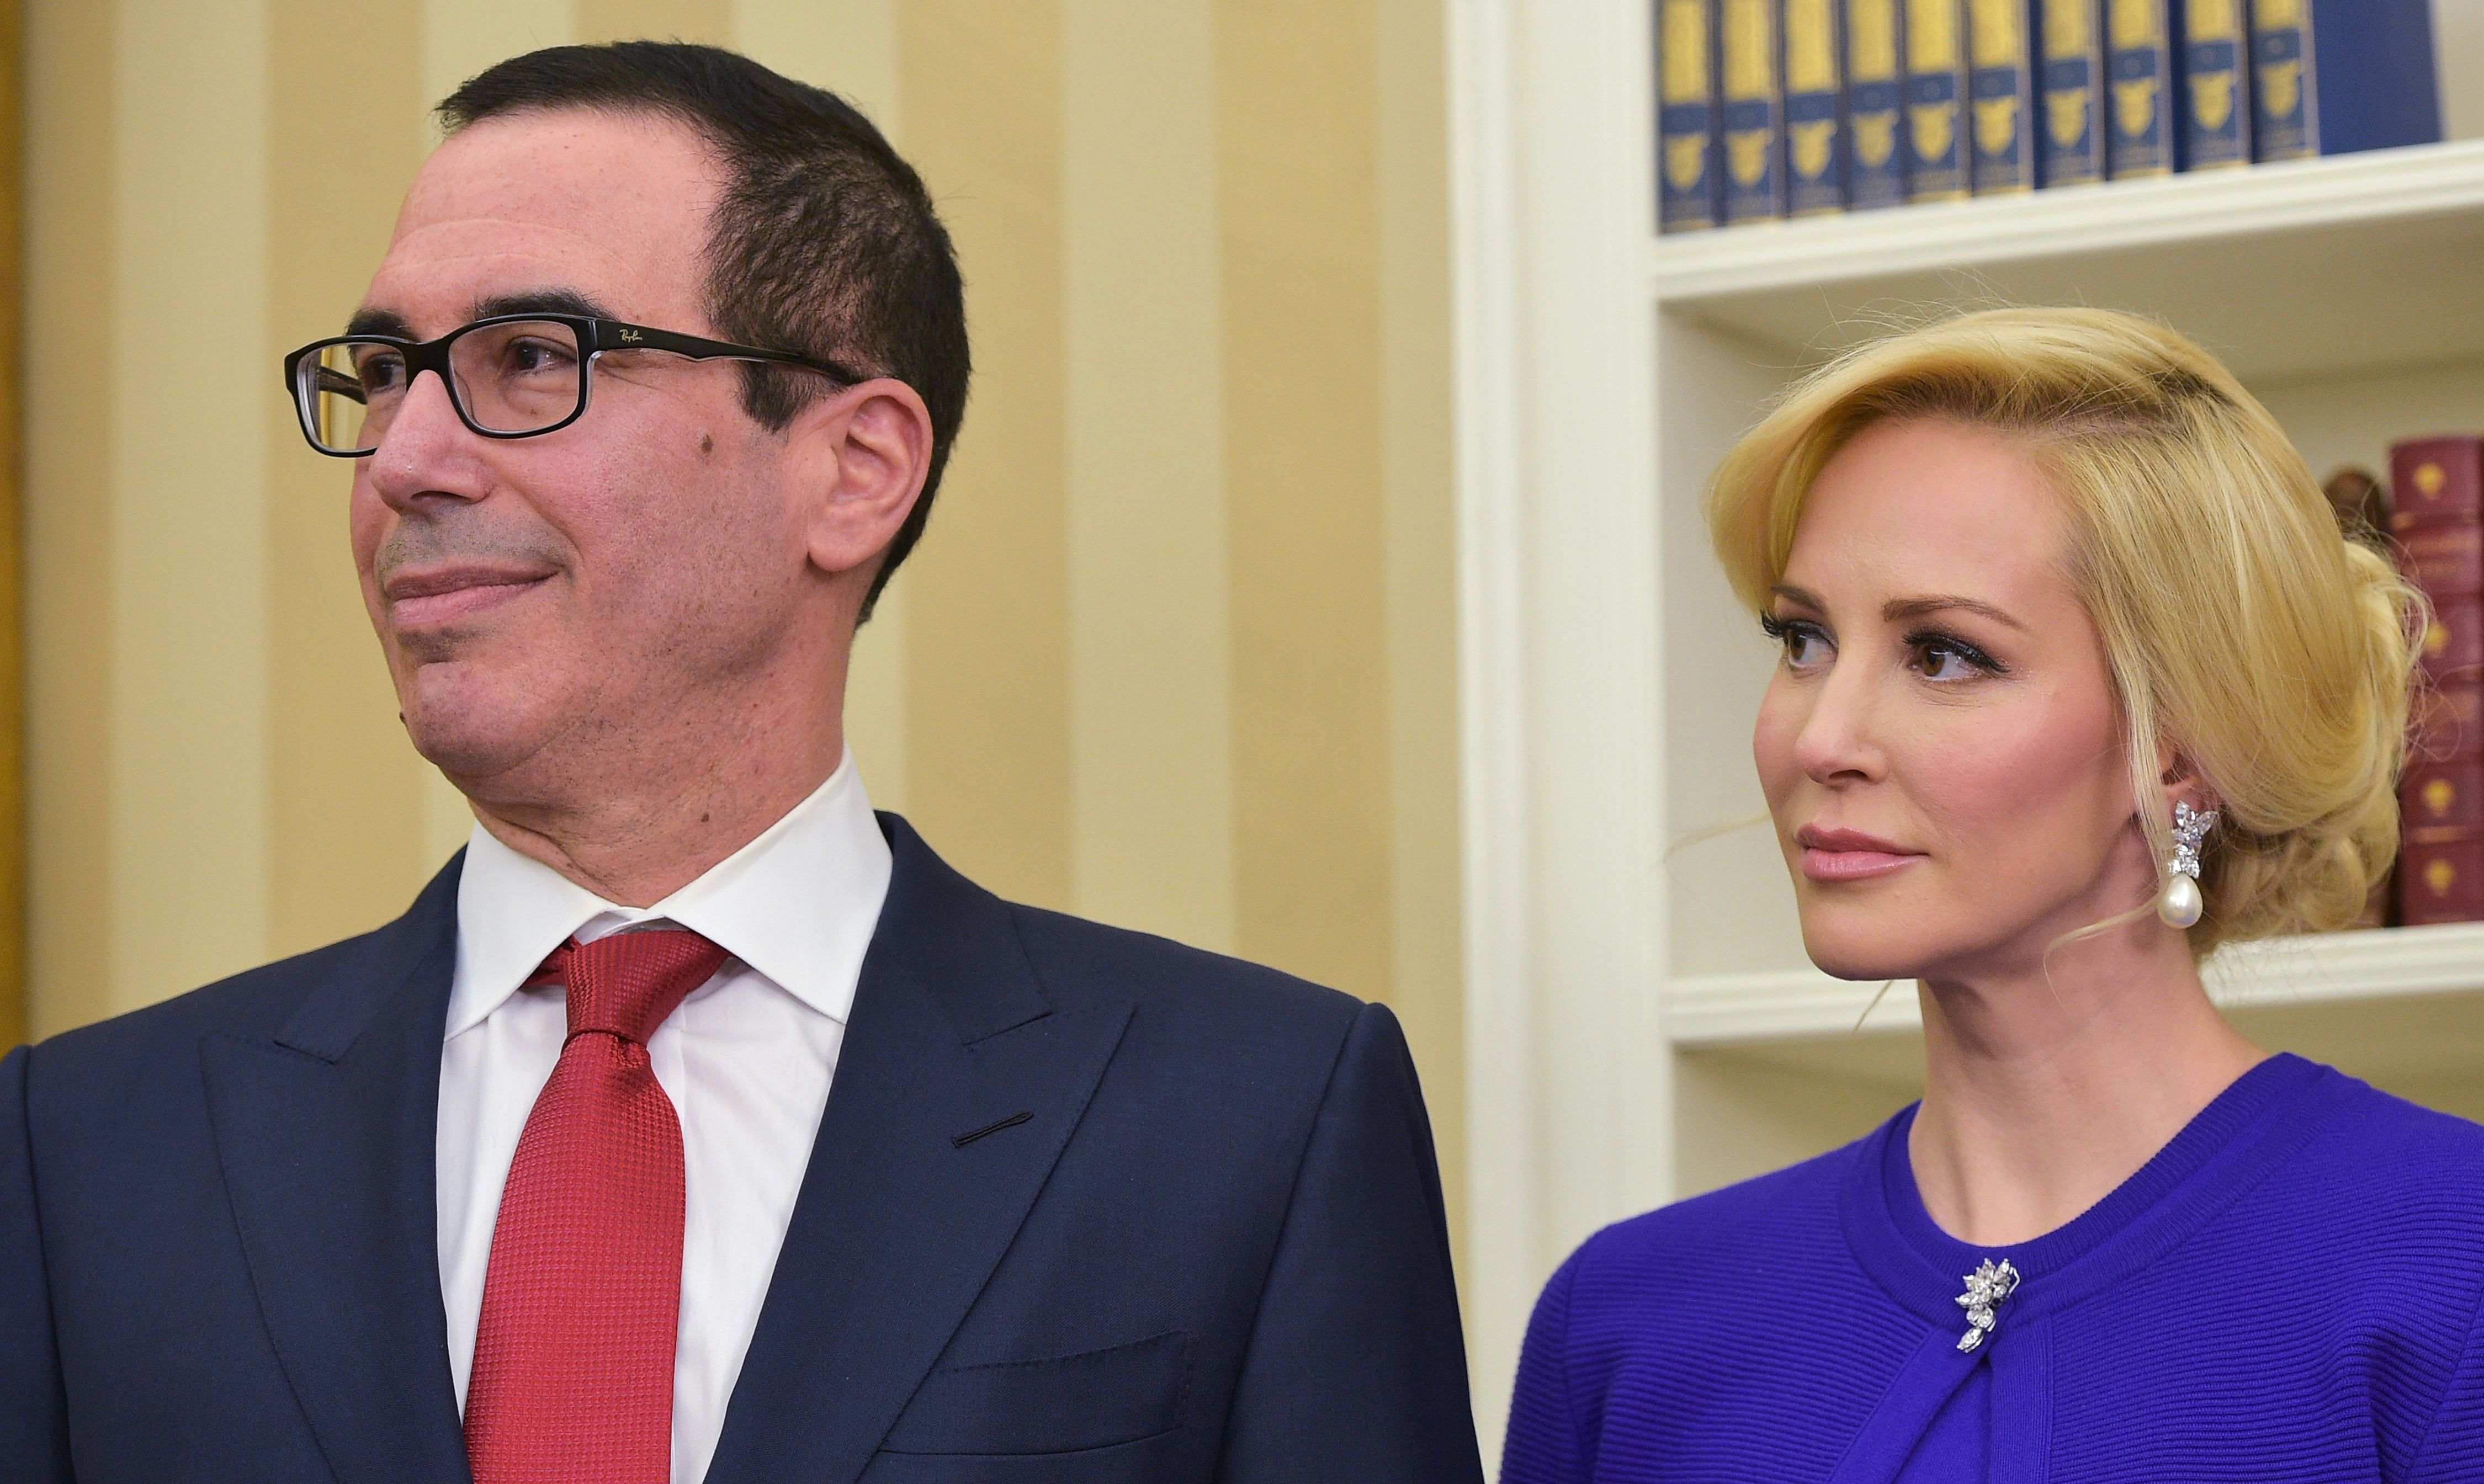 Steven Mnuchin and his wife Louise Linton watch as President Donald Trump speaks during Mnuchin's swearing-in ceremony as Treasury Secretary in the Oval Office of the White House on Febr. 13, 2017 in Washington, DC. (MANDEL NGAN—AFP/Getty Images)